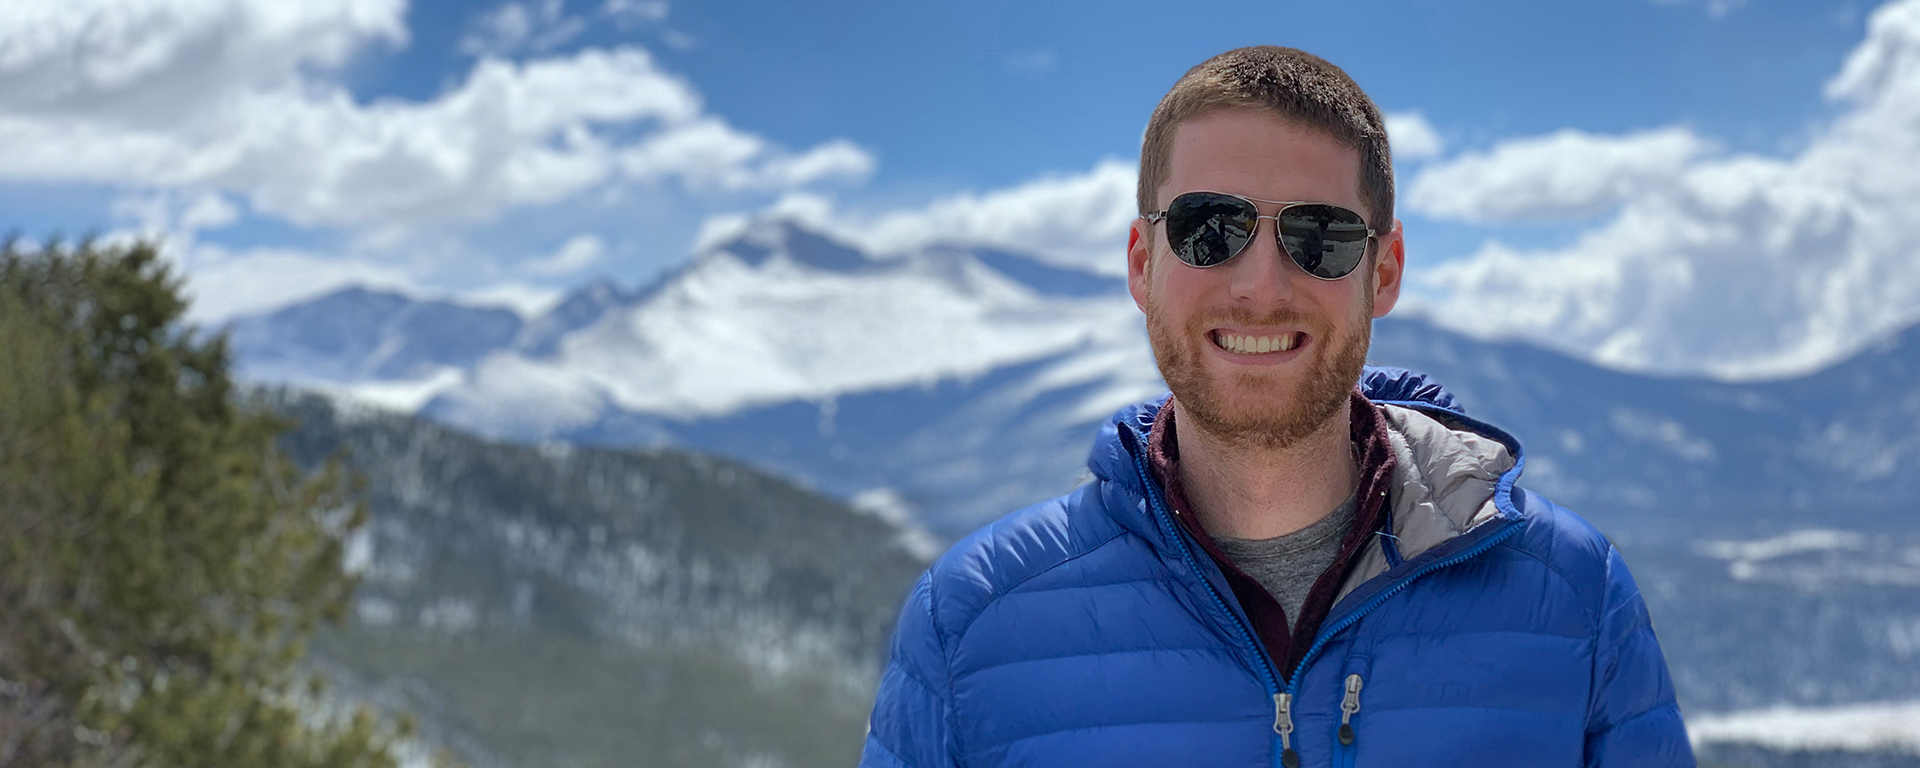 Jared, a Capital One tech associate, stands in front of snowy mountaintops